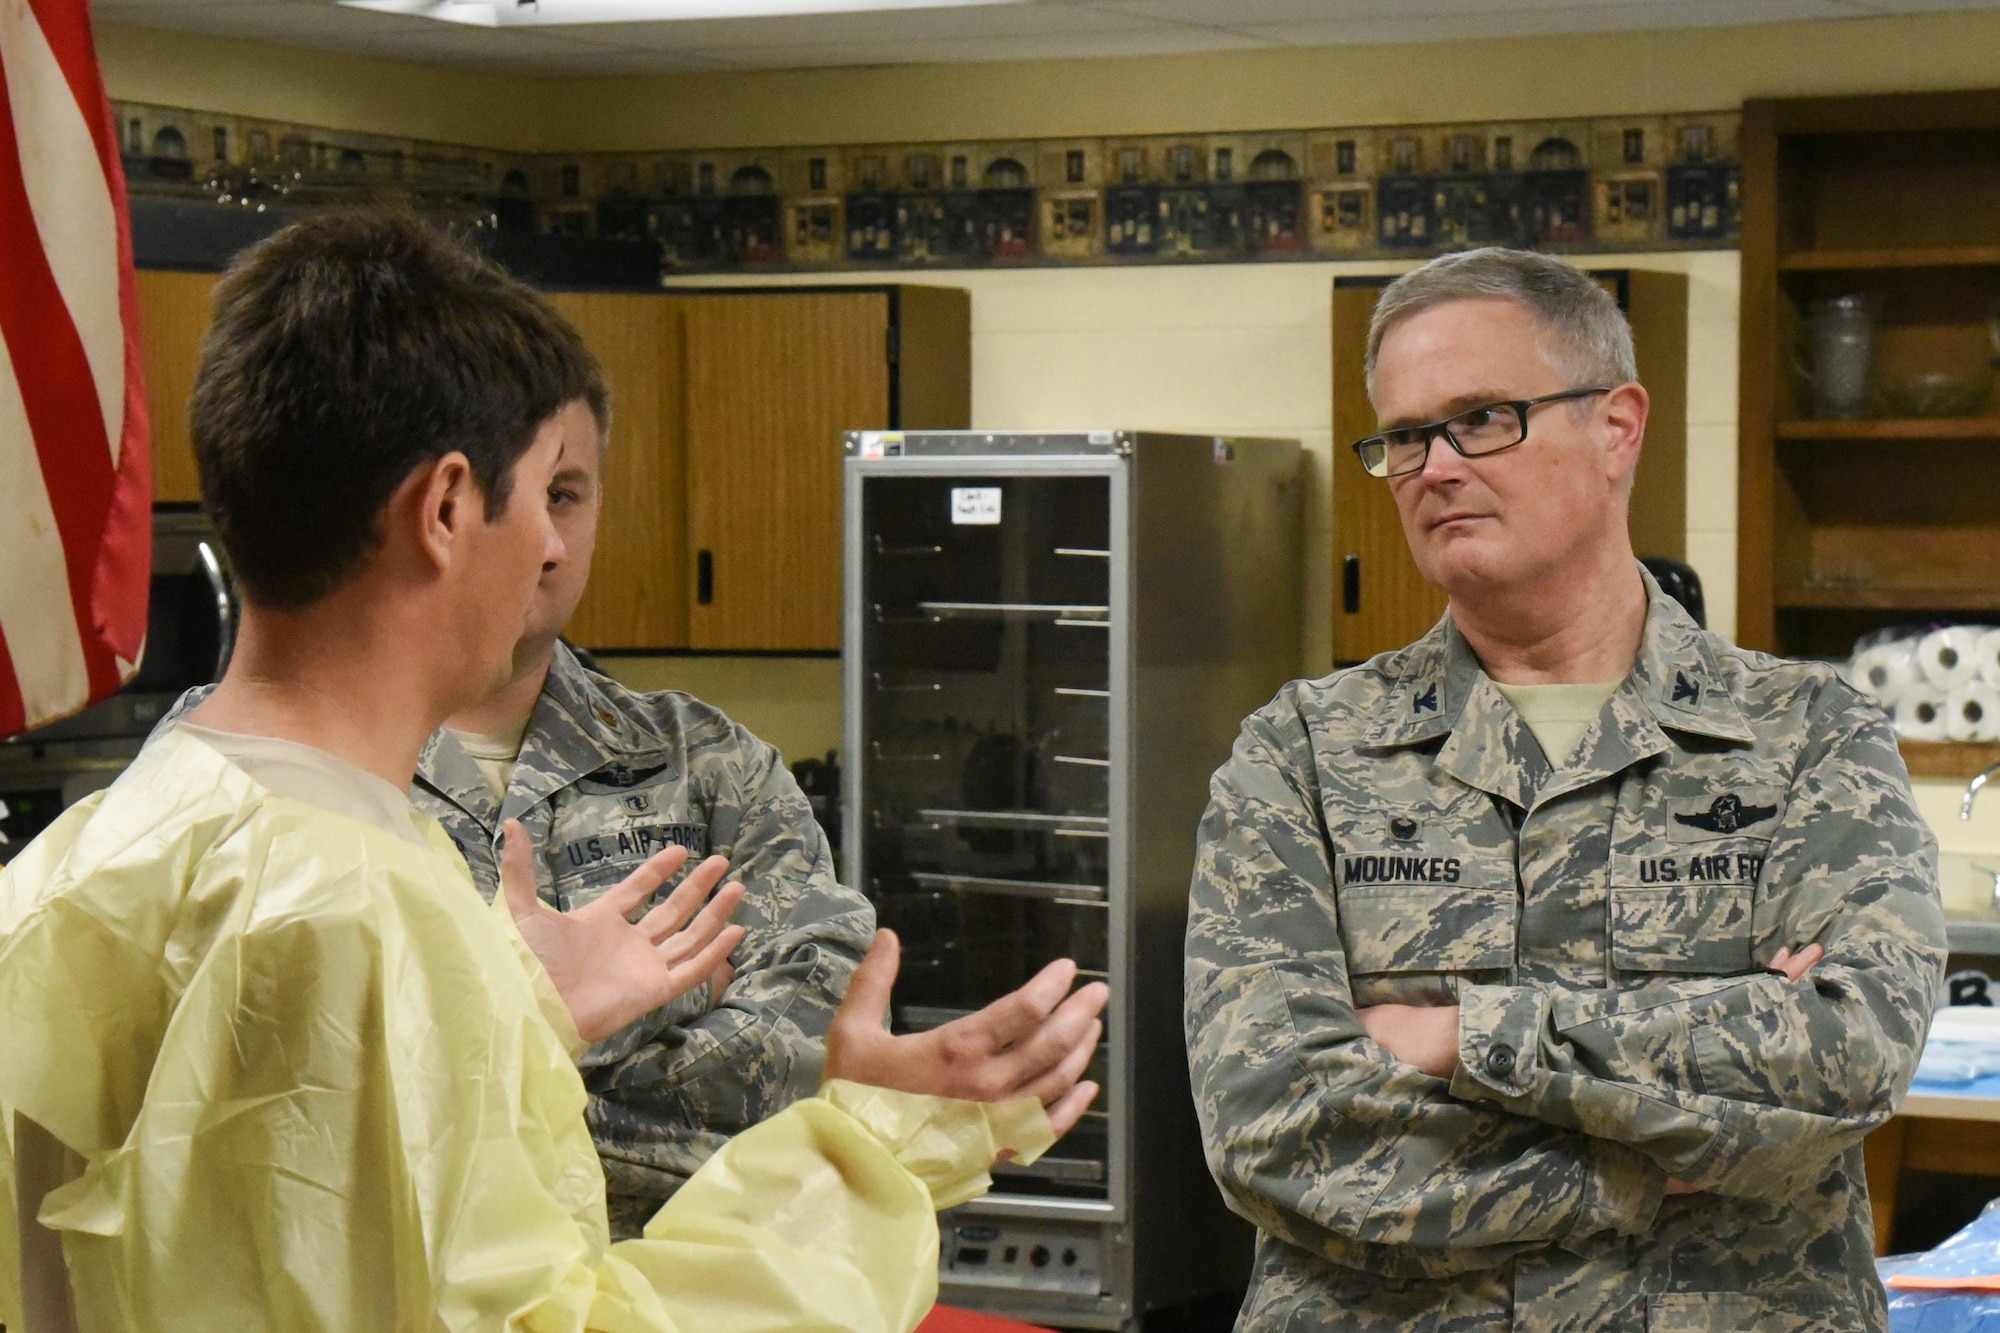 Col. David Mounkes, commander of the Kentucky Air National Guard’s 123rd Airlift Wing, tours Graves County High School July 22, 2016, in Mayfield, Ky., where Bluegrass Medical Innovative Readiness Training is taking place. The Kentucky Air Guard, U.S. Navy Reserve, and other military units are teaming with the Delta Regional Authority to offer medical, vision and dental care at no cost to residents in Mayfield and two other Western Kentucky locations from July 18 to 27 as part of the training event. (U.S. Air National Guard photo by 1st Lt. James W. Killen)